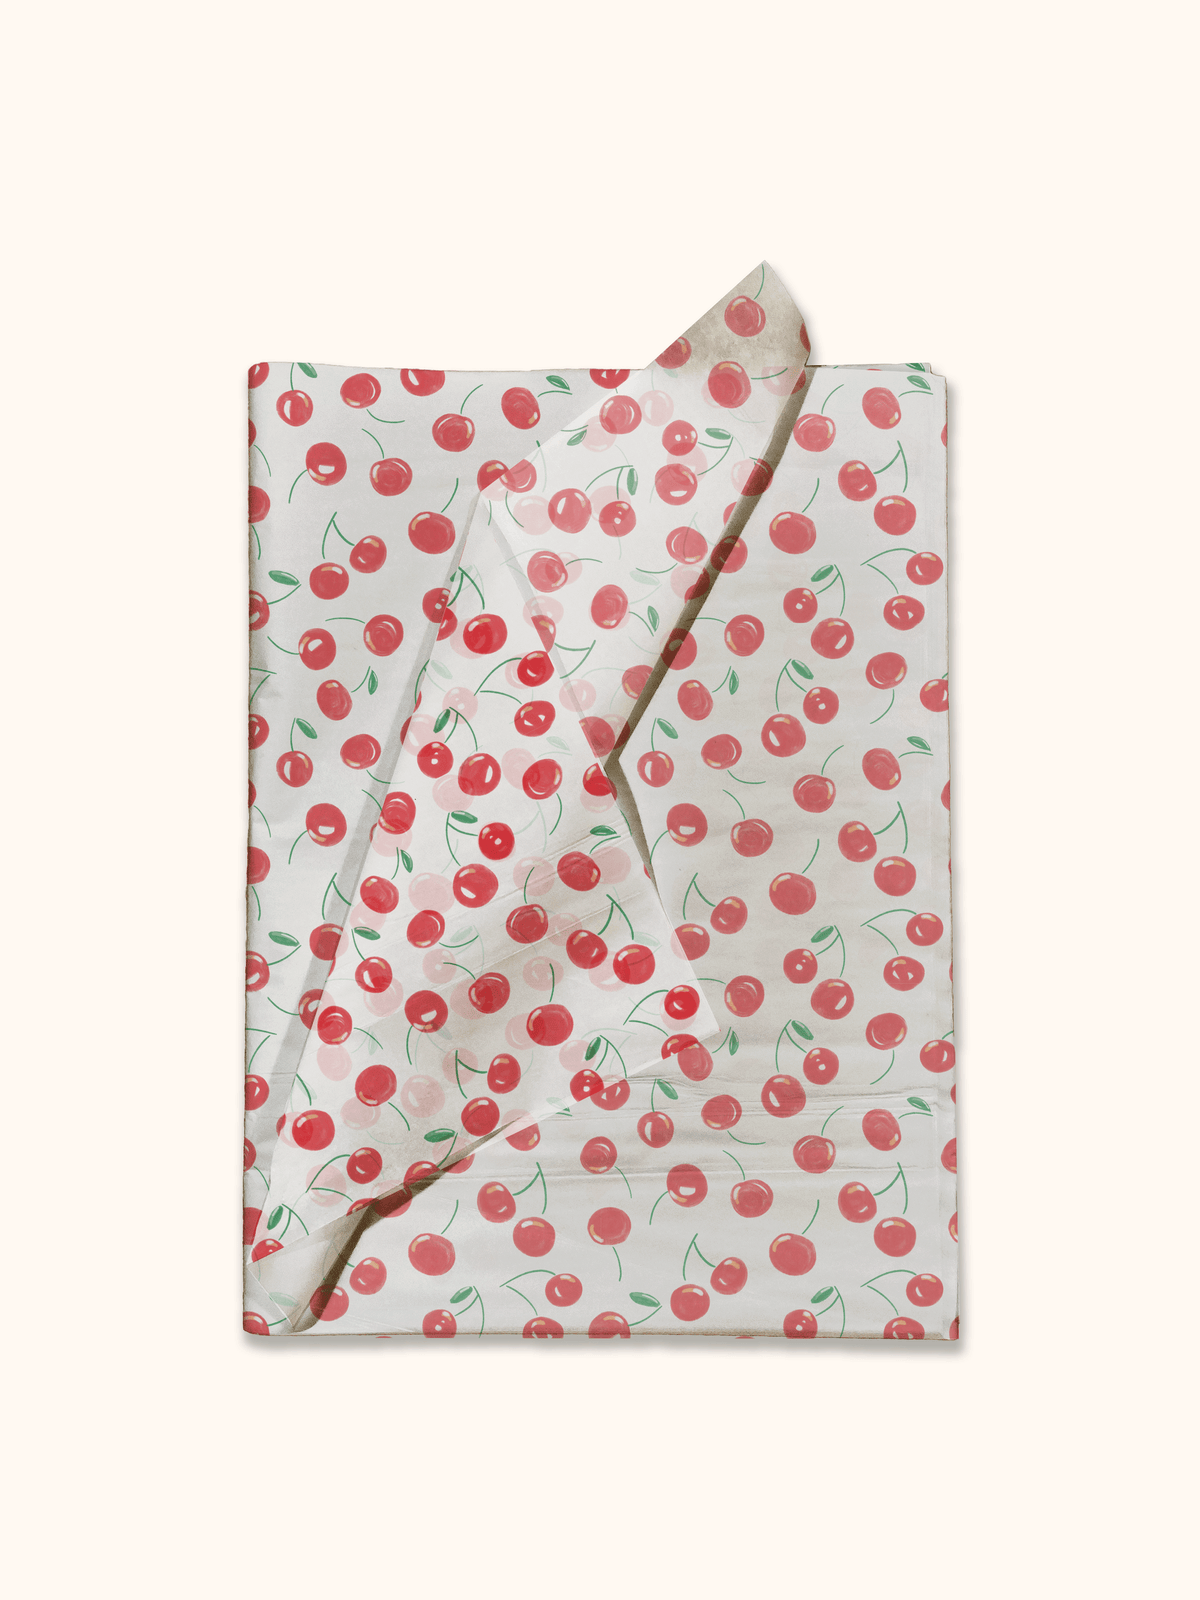 Red cherries with stems Printed tissue wrapping paper Pro Supply Global